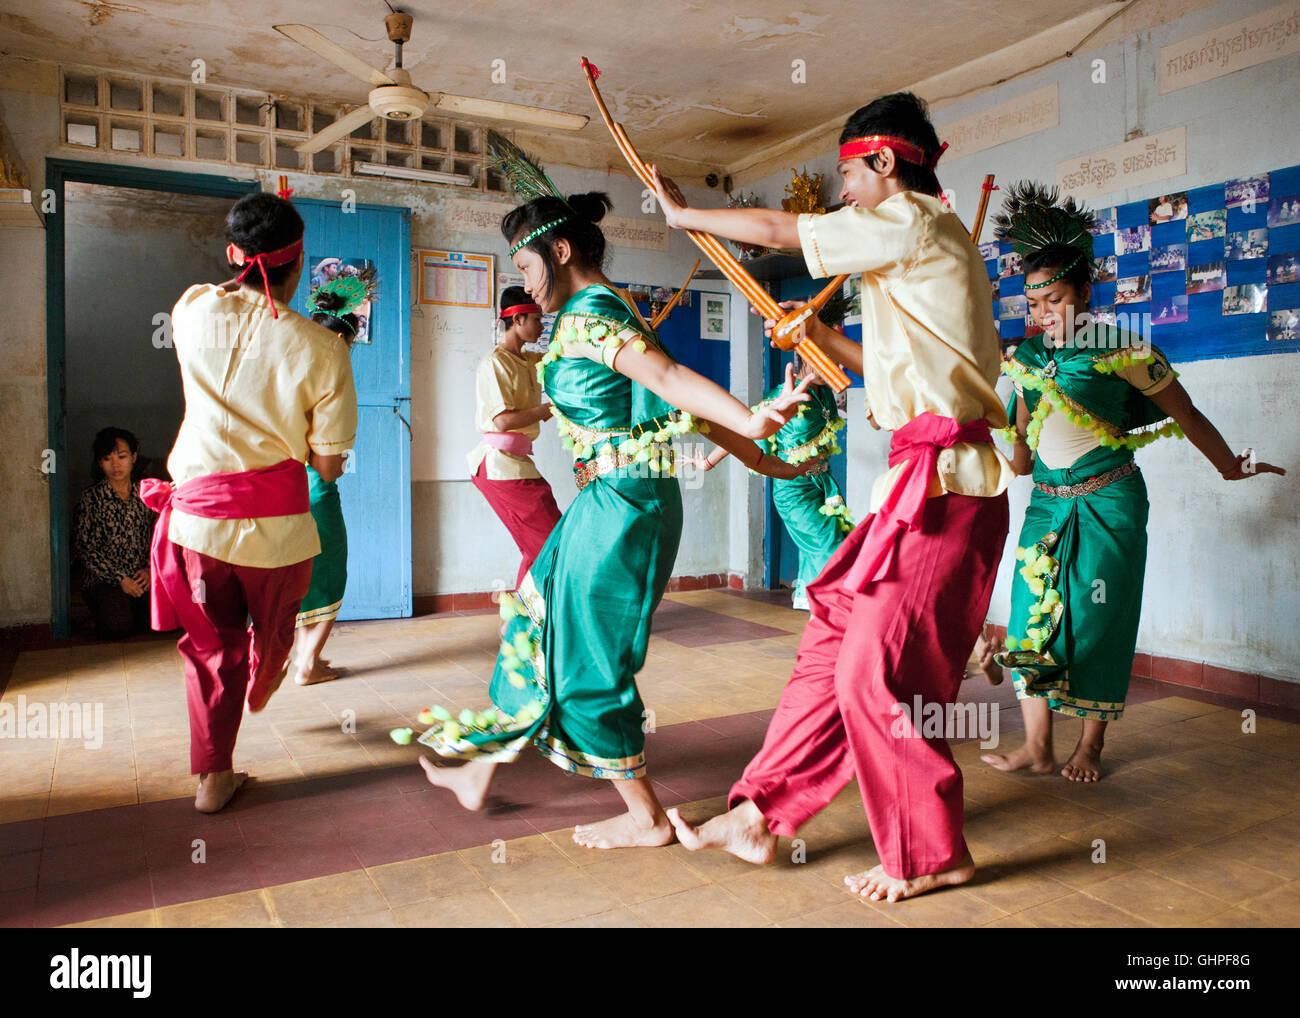 Students from Cambodia Living Arts rehearse traditional Khmer folk dancing in Phnom Pehn, Cambodia. Stock Photo